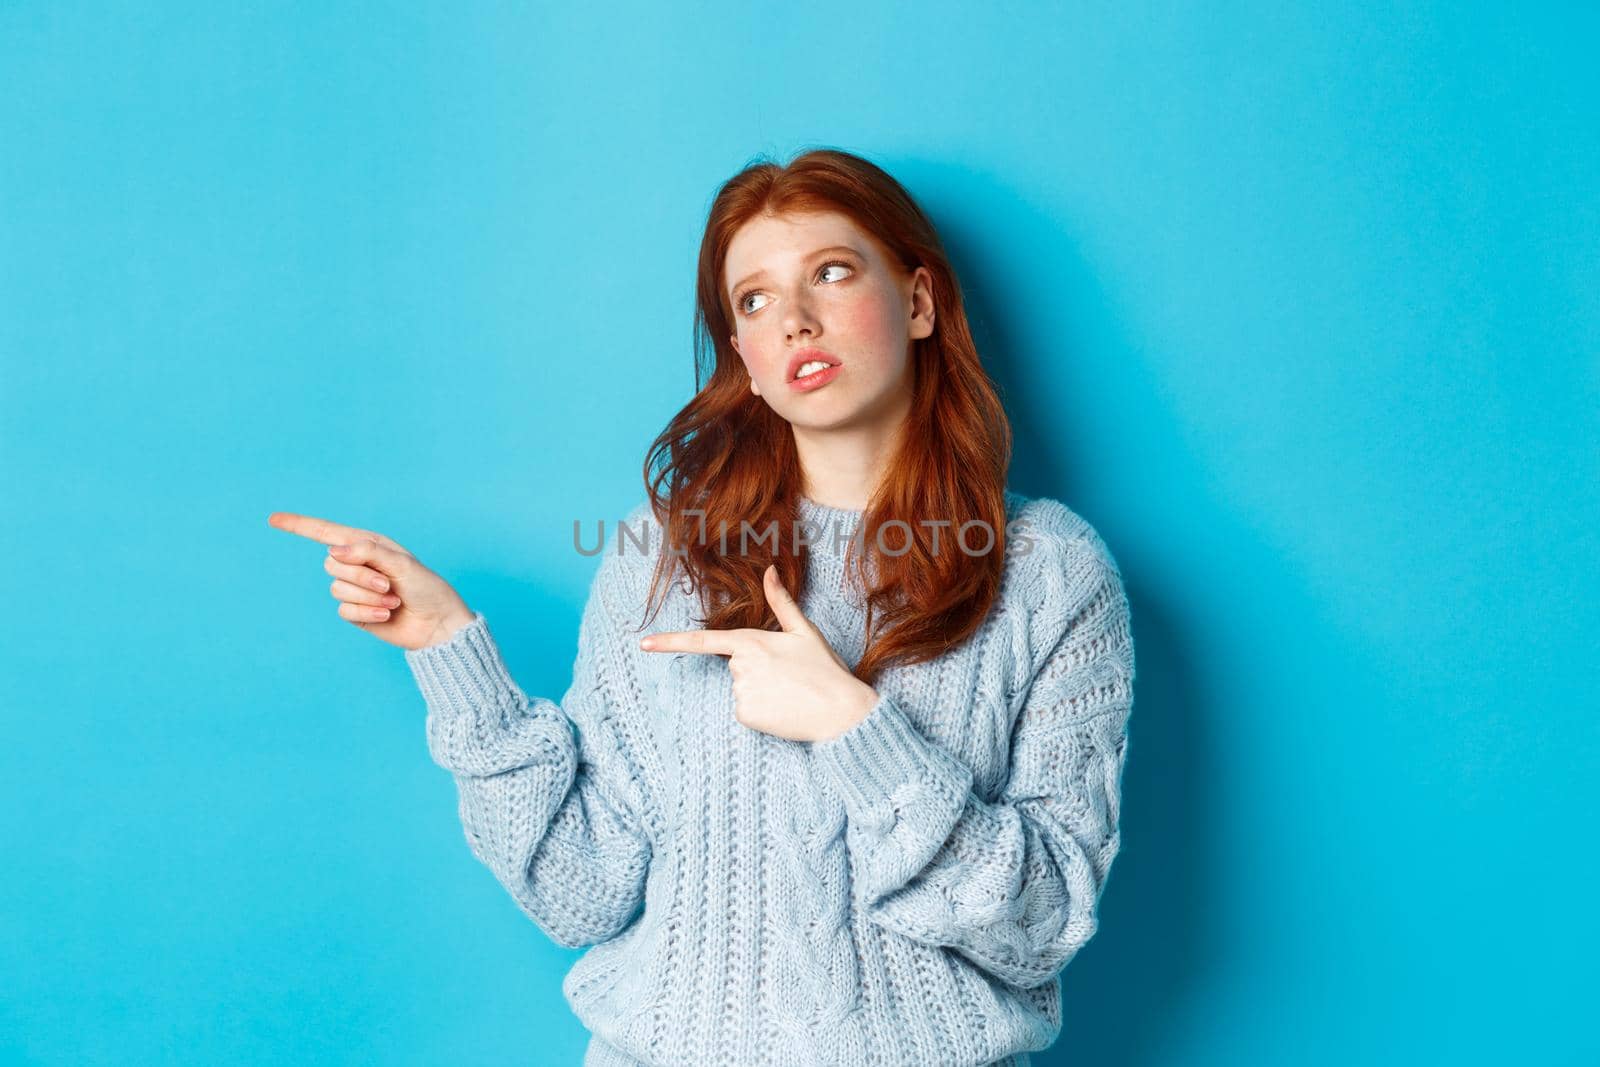 Annoyed teenage redhead girl roll eyes, pointing fingers left at something boring or lame, standing irritated over blue background.